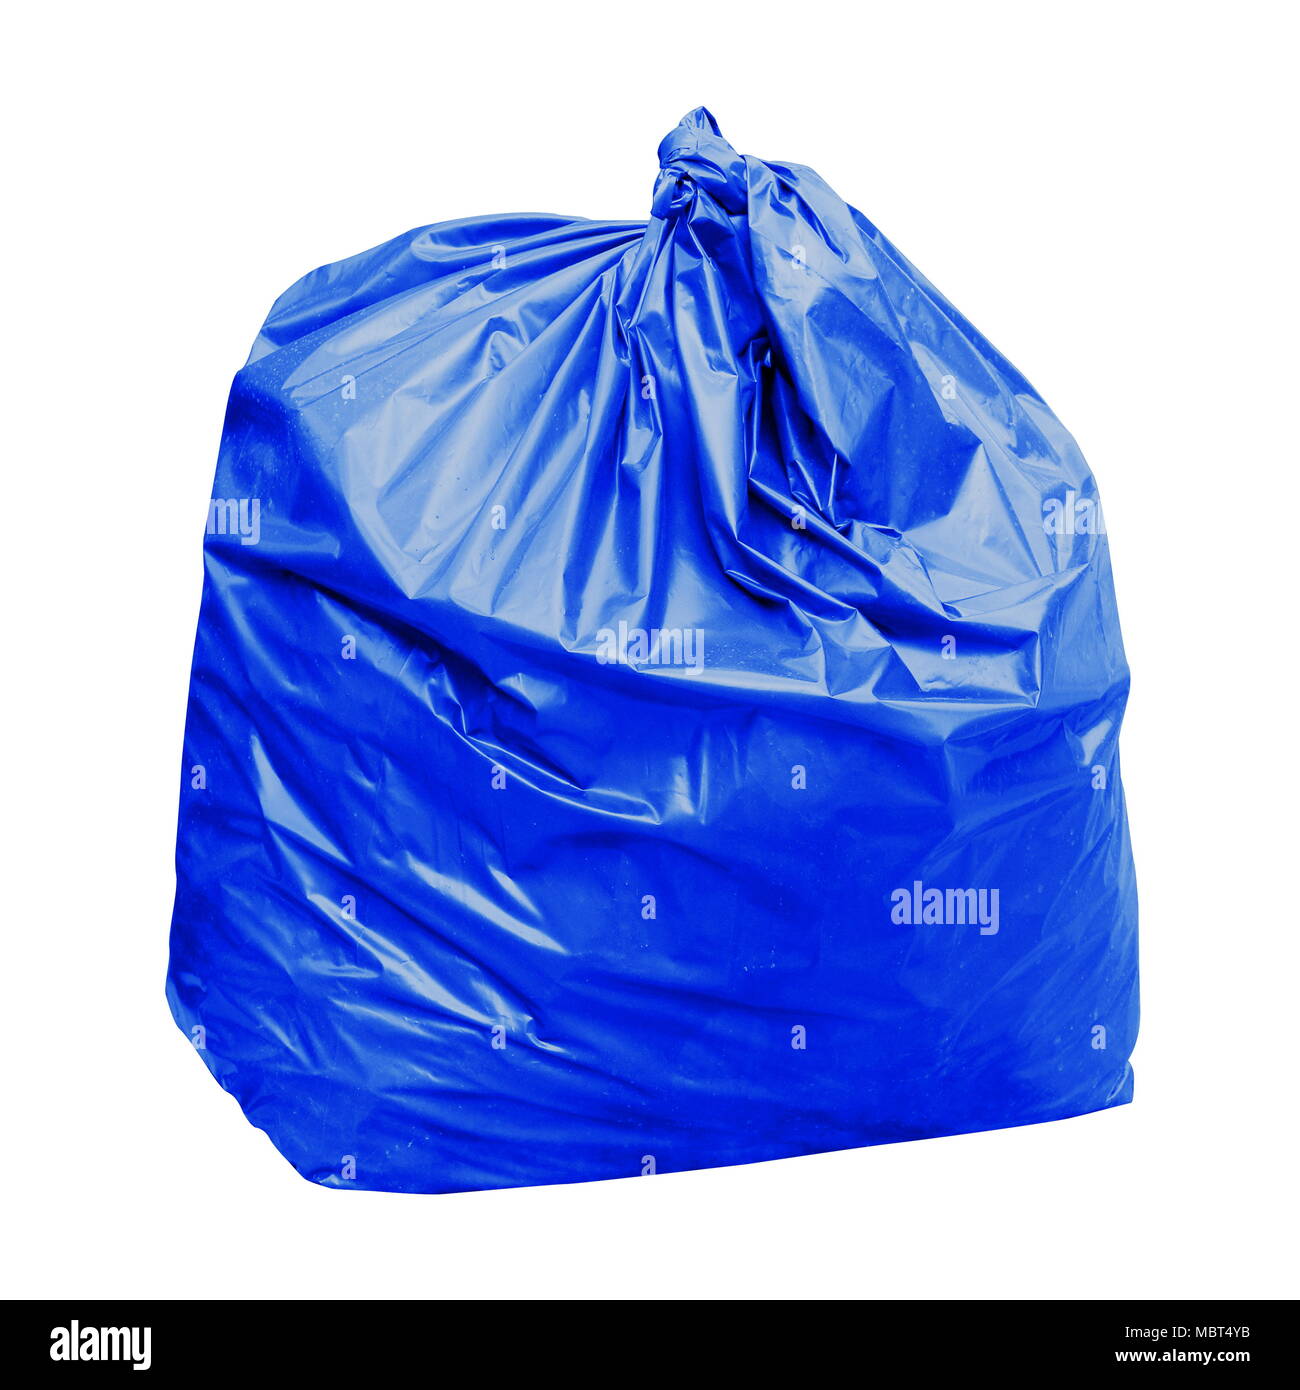 https://c8.alamy.com/comp/MBT4YB/blue-garbage-bag-with-concept-the-color-of-blue-garbage-bags-is-general-waste-isolated-on-white-background-MBT4YB.jpg